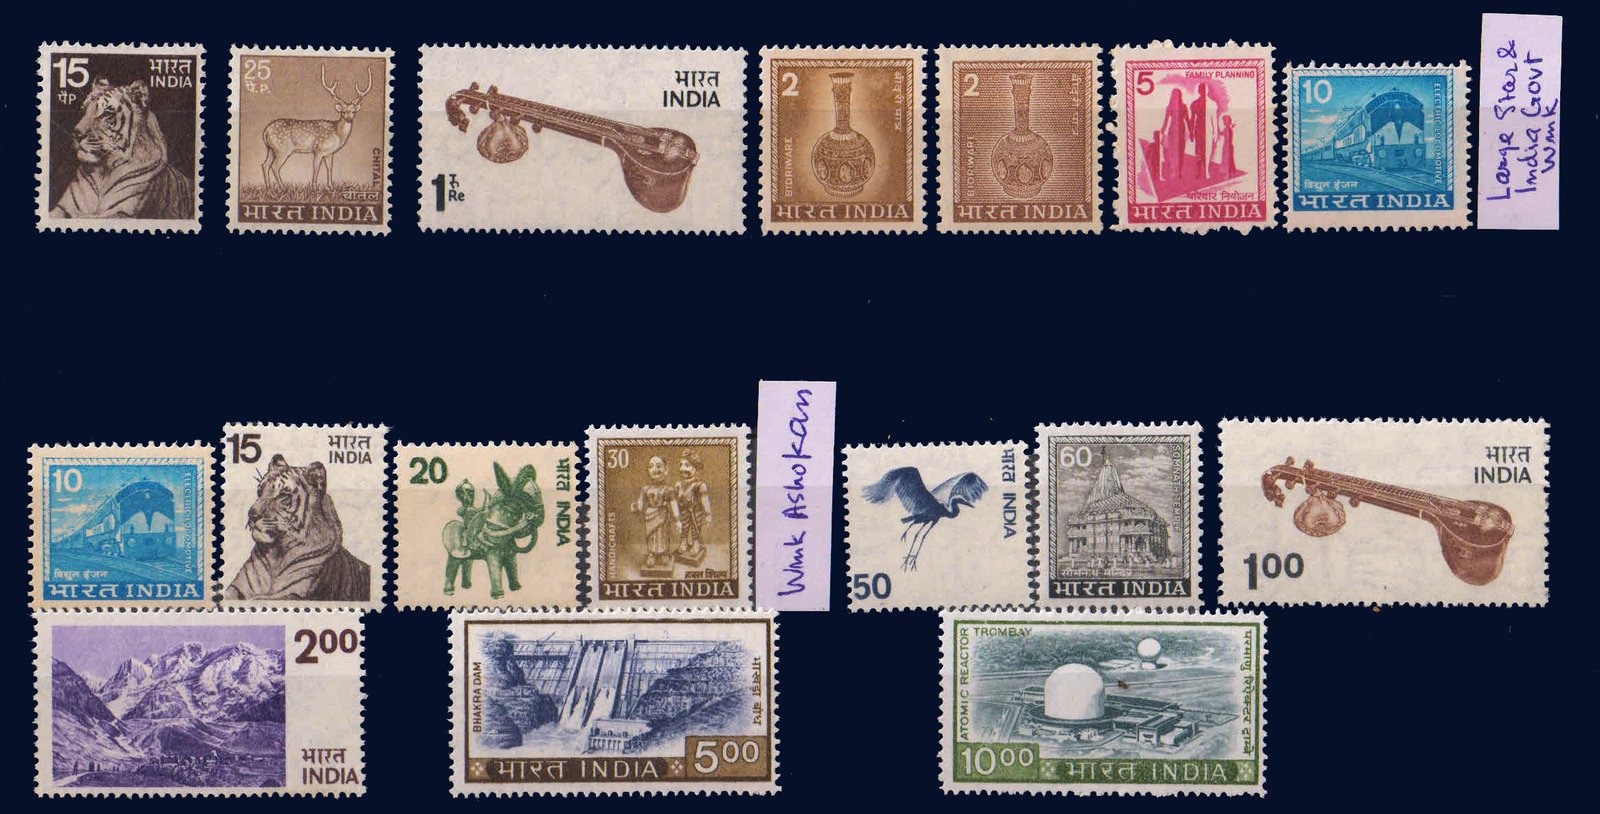 INDIA Definitive 5th Series, Modification of 4th Series, Complete Set of 17 Stamps, MNH